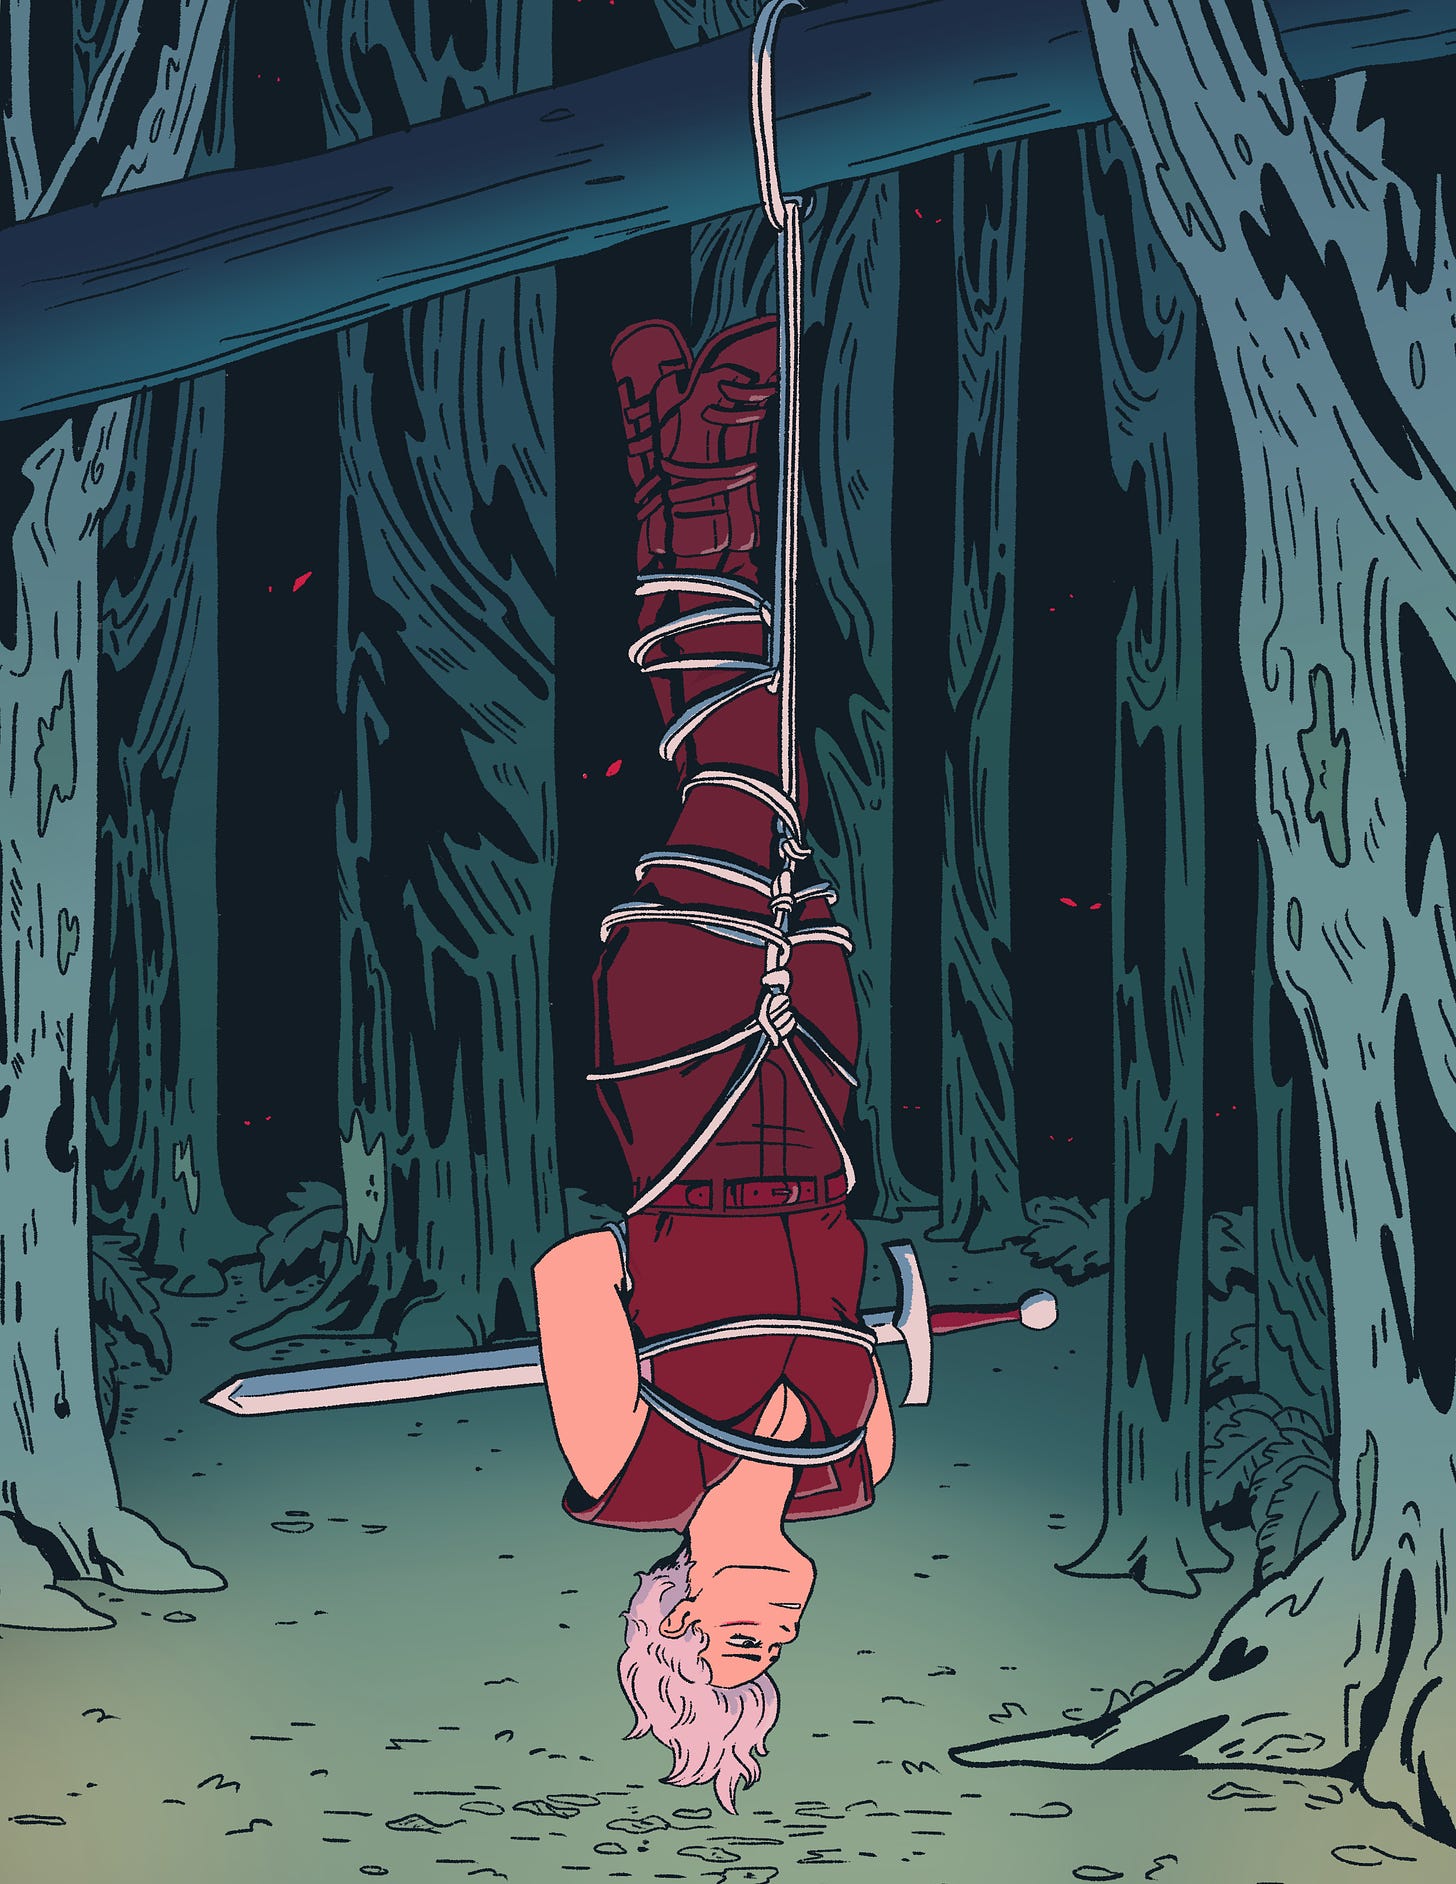 Illustration: a butch woman tied up in rope hangs upside down in a spooky forest